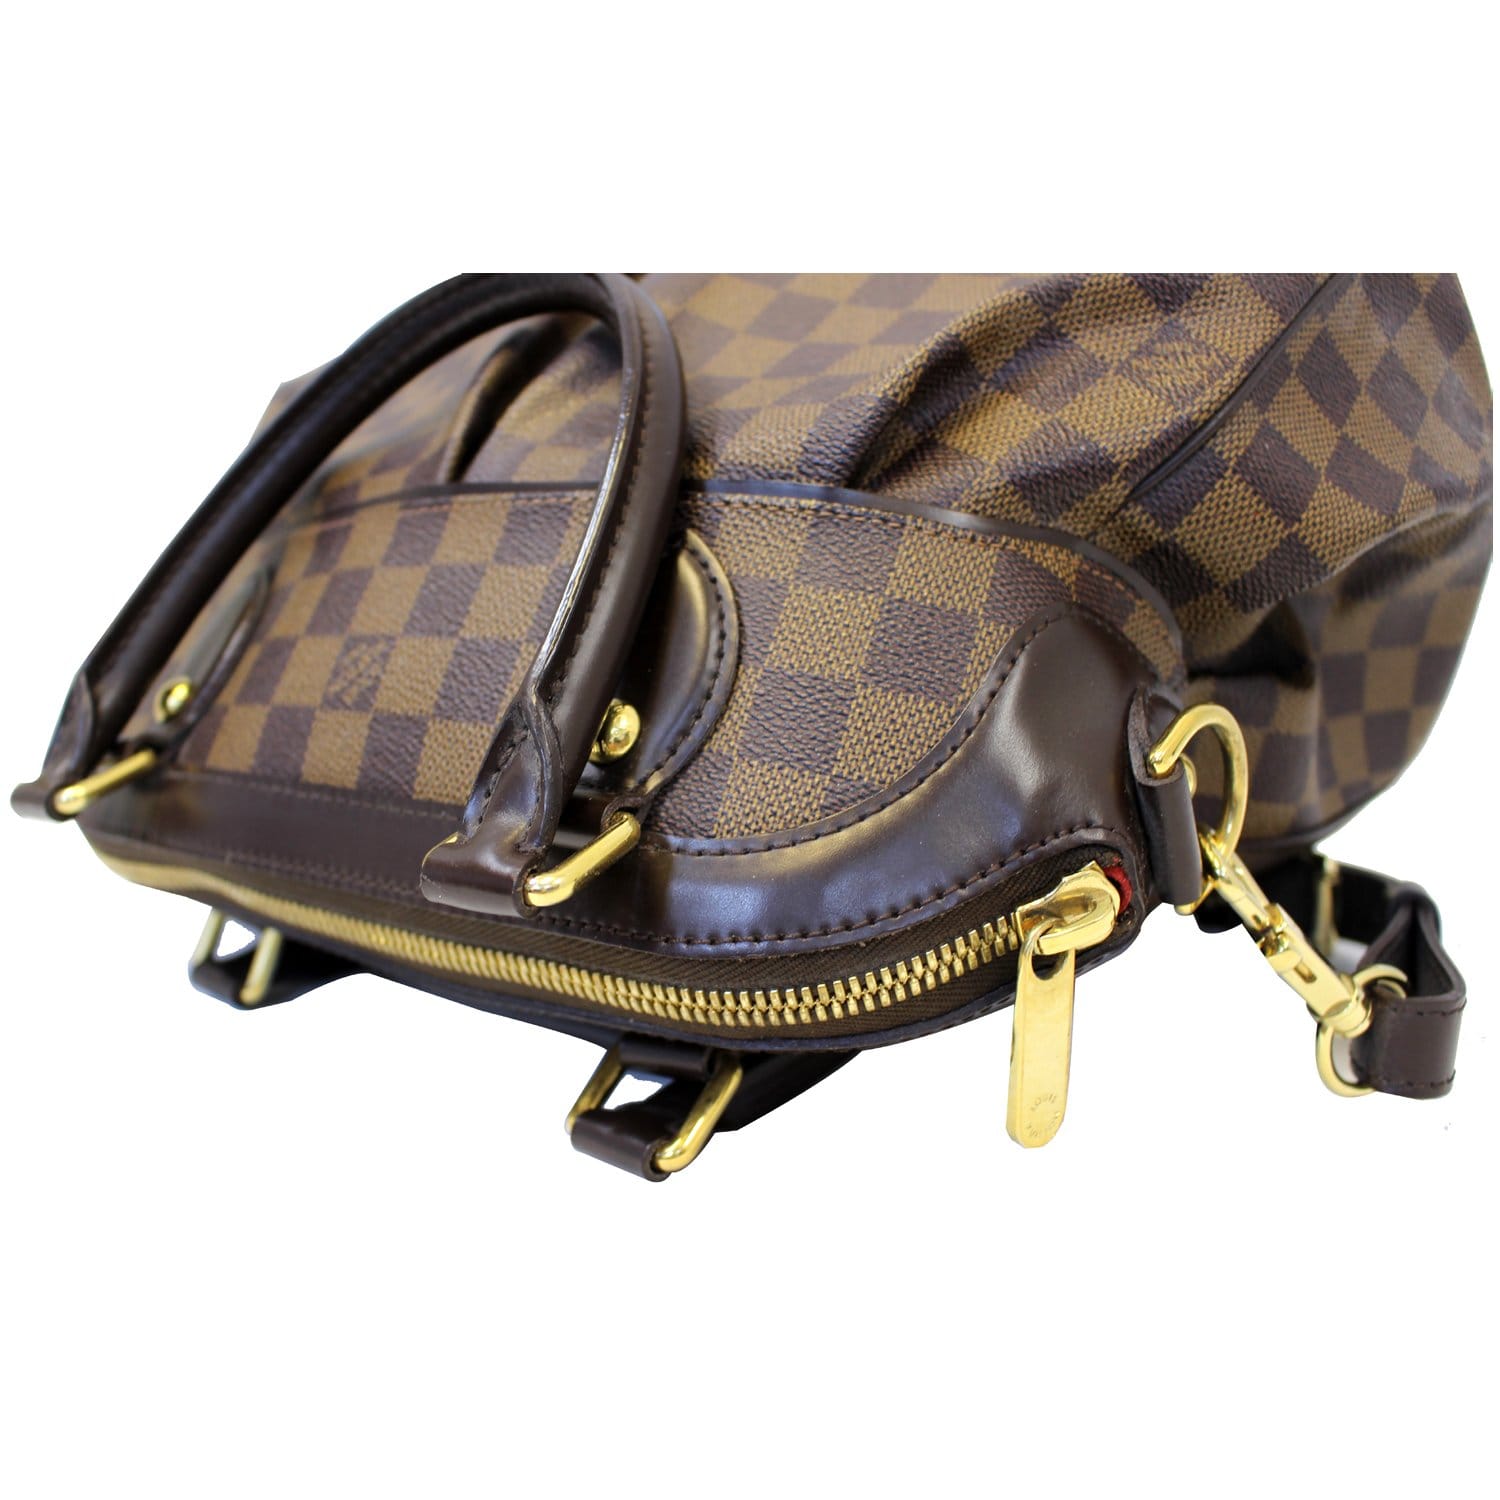 Louis Vuitton Trevi PM Damier Ebene Canvas Bag US$ 1,026 . Explore the full  catalogue of bags, clothes, jewelry and accessories at…